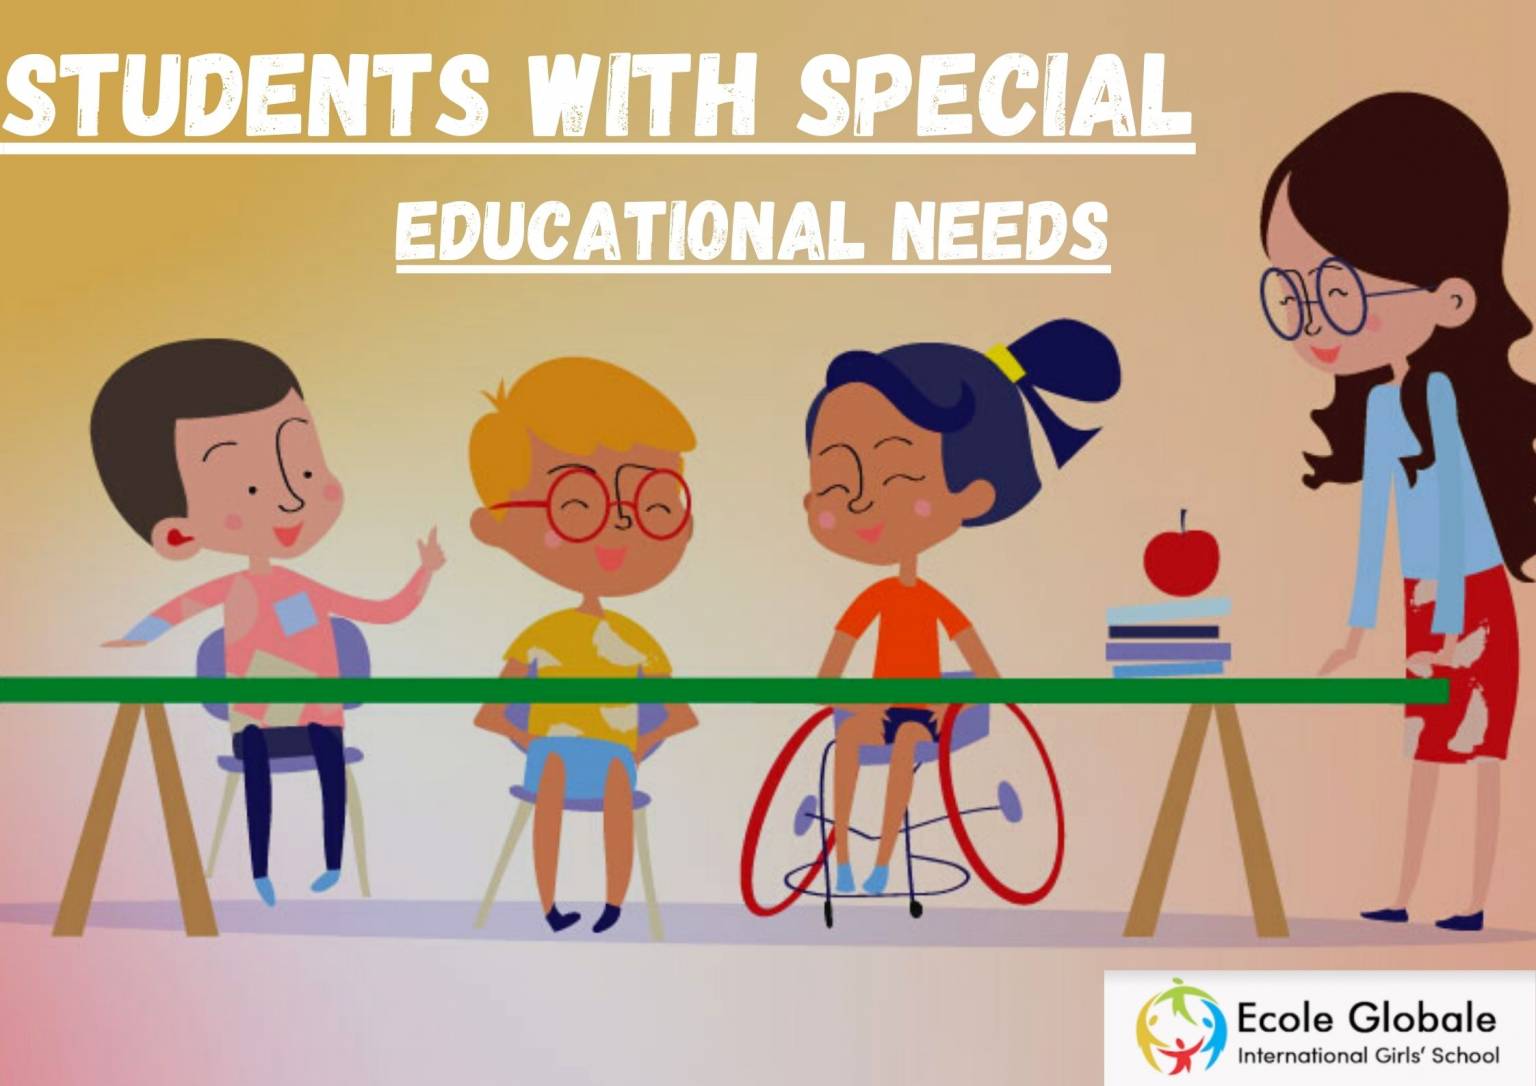 research topics in special needs education